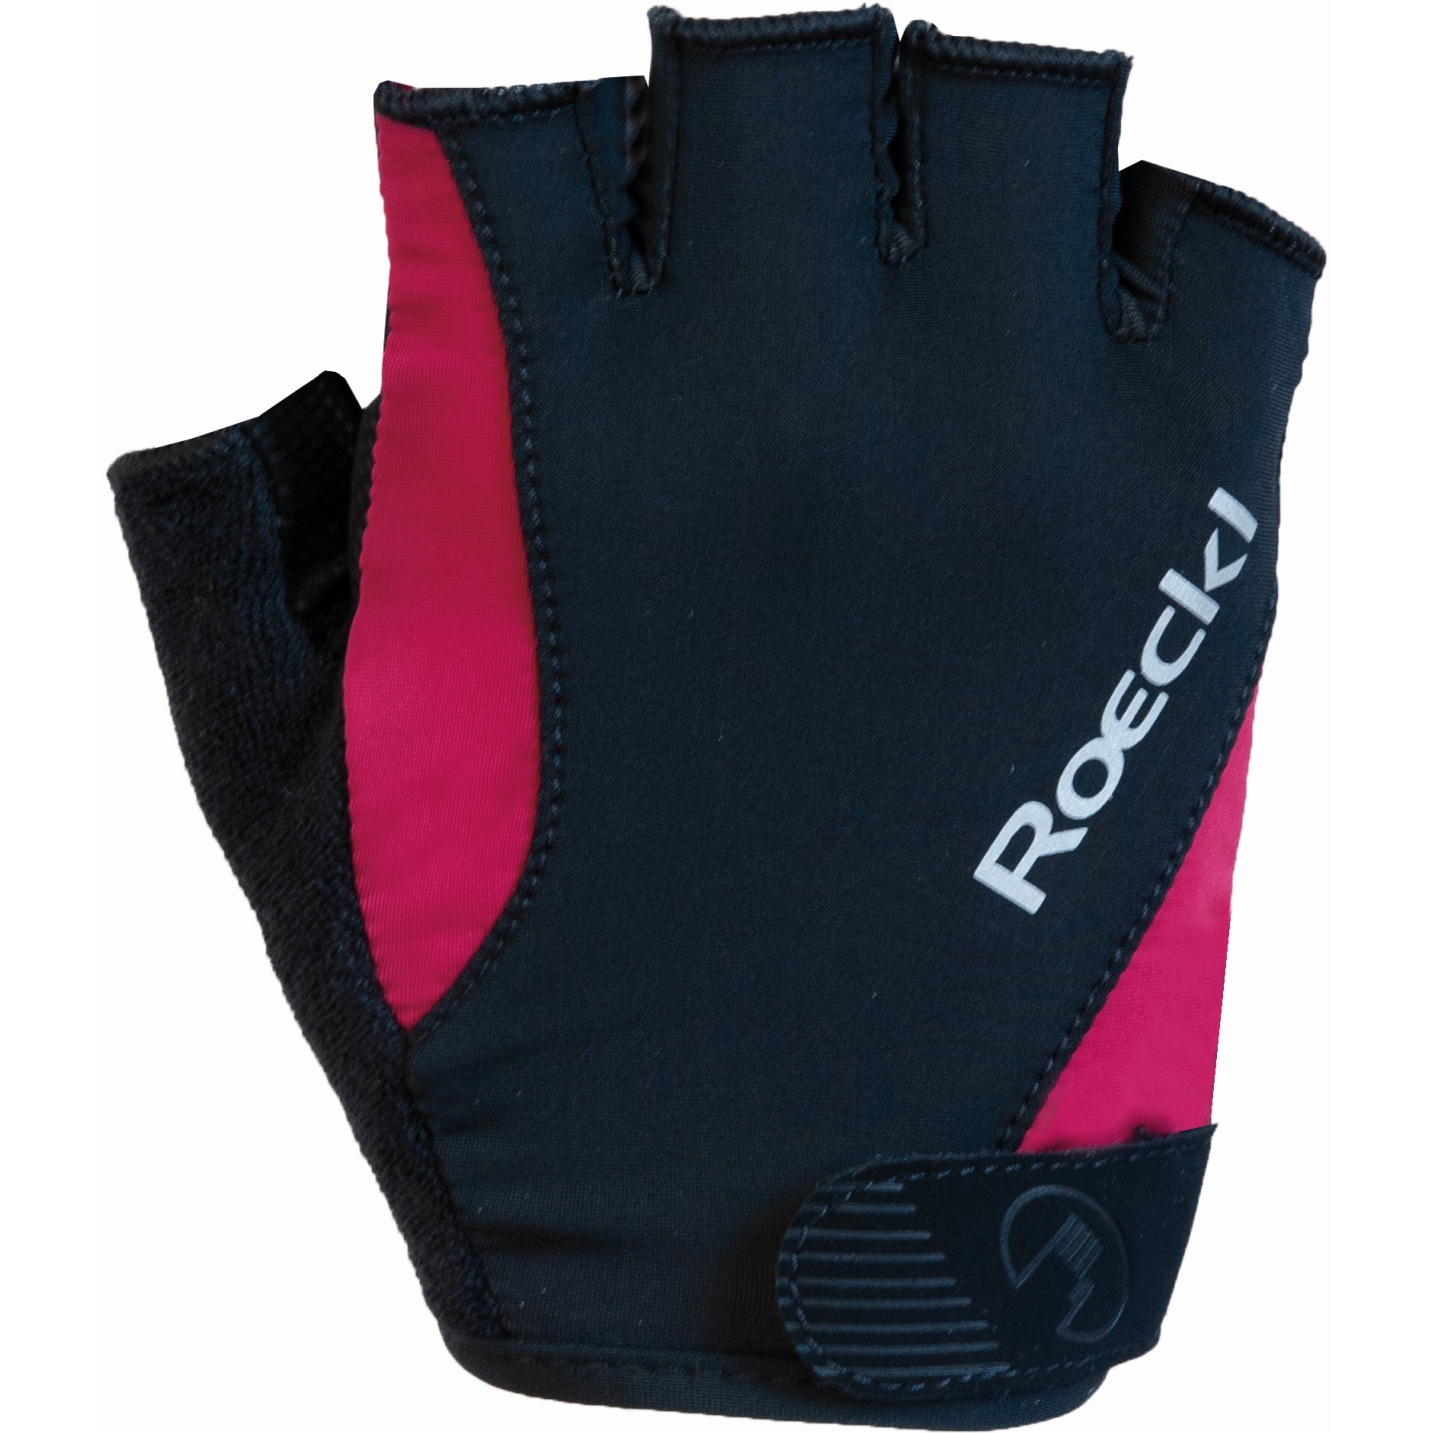 Picture of Roeckl Sports Basel Cycling Gloves - black/raspberry 0036